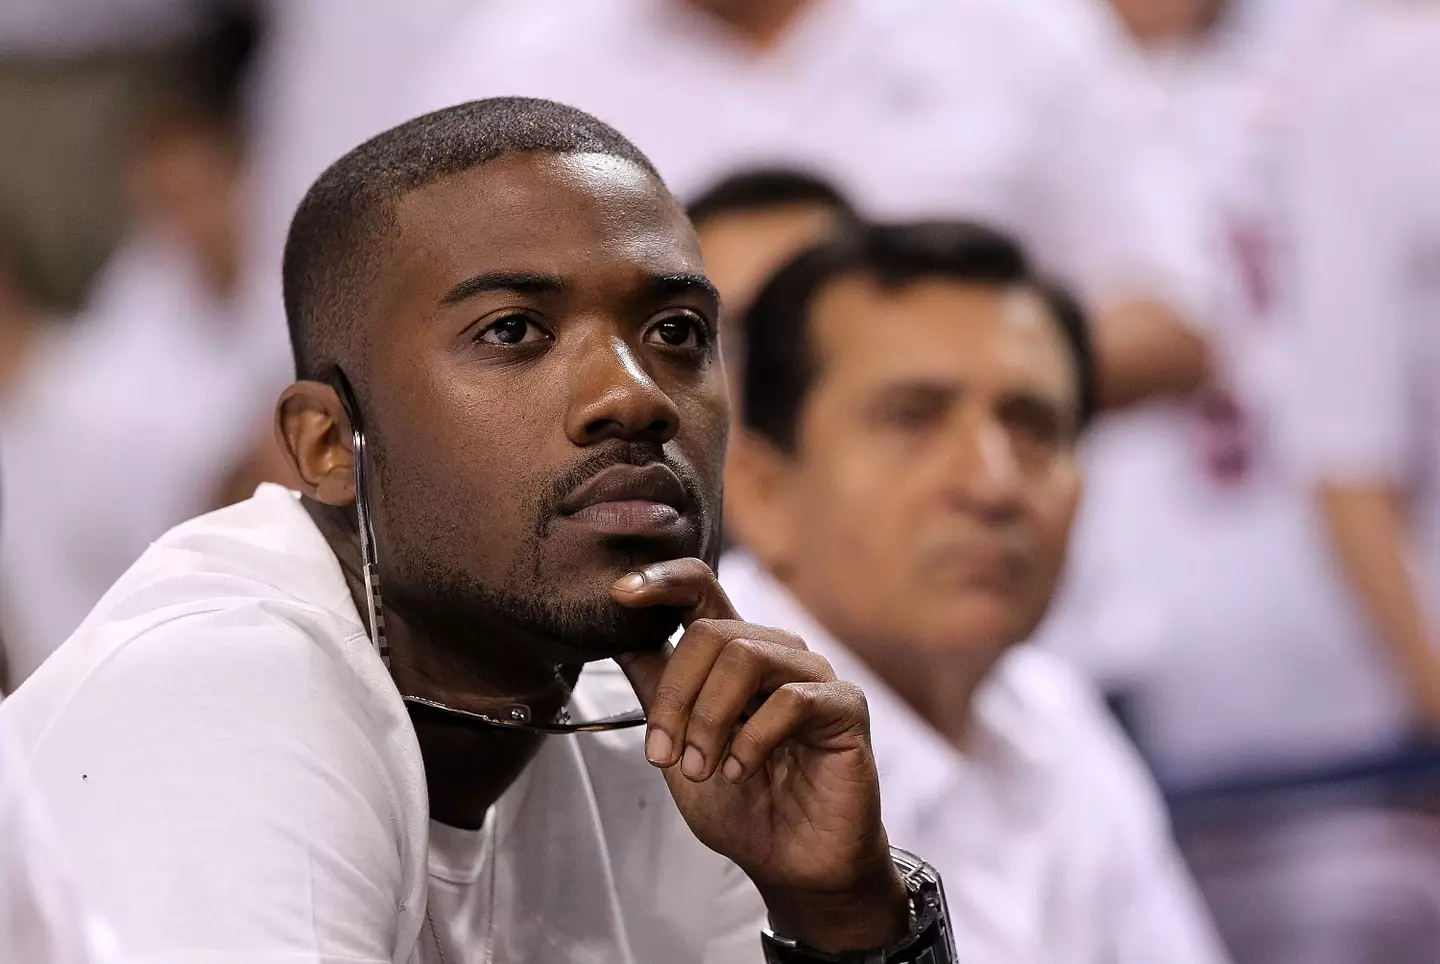 Ray J's manager has spoken out about the infamous tape.